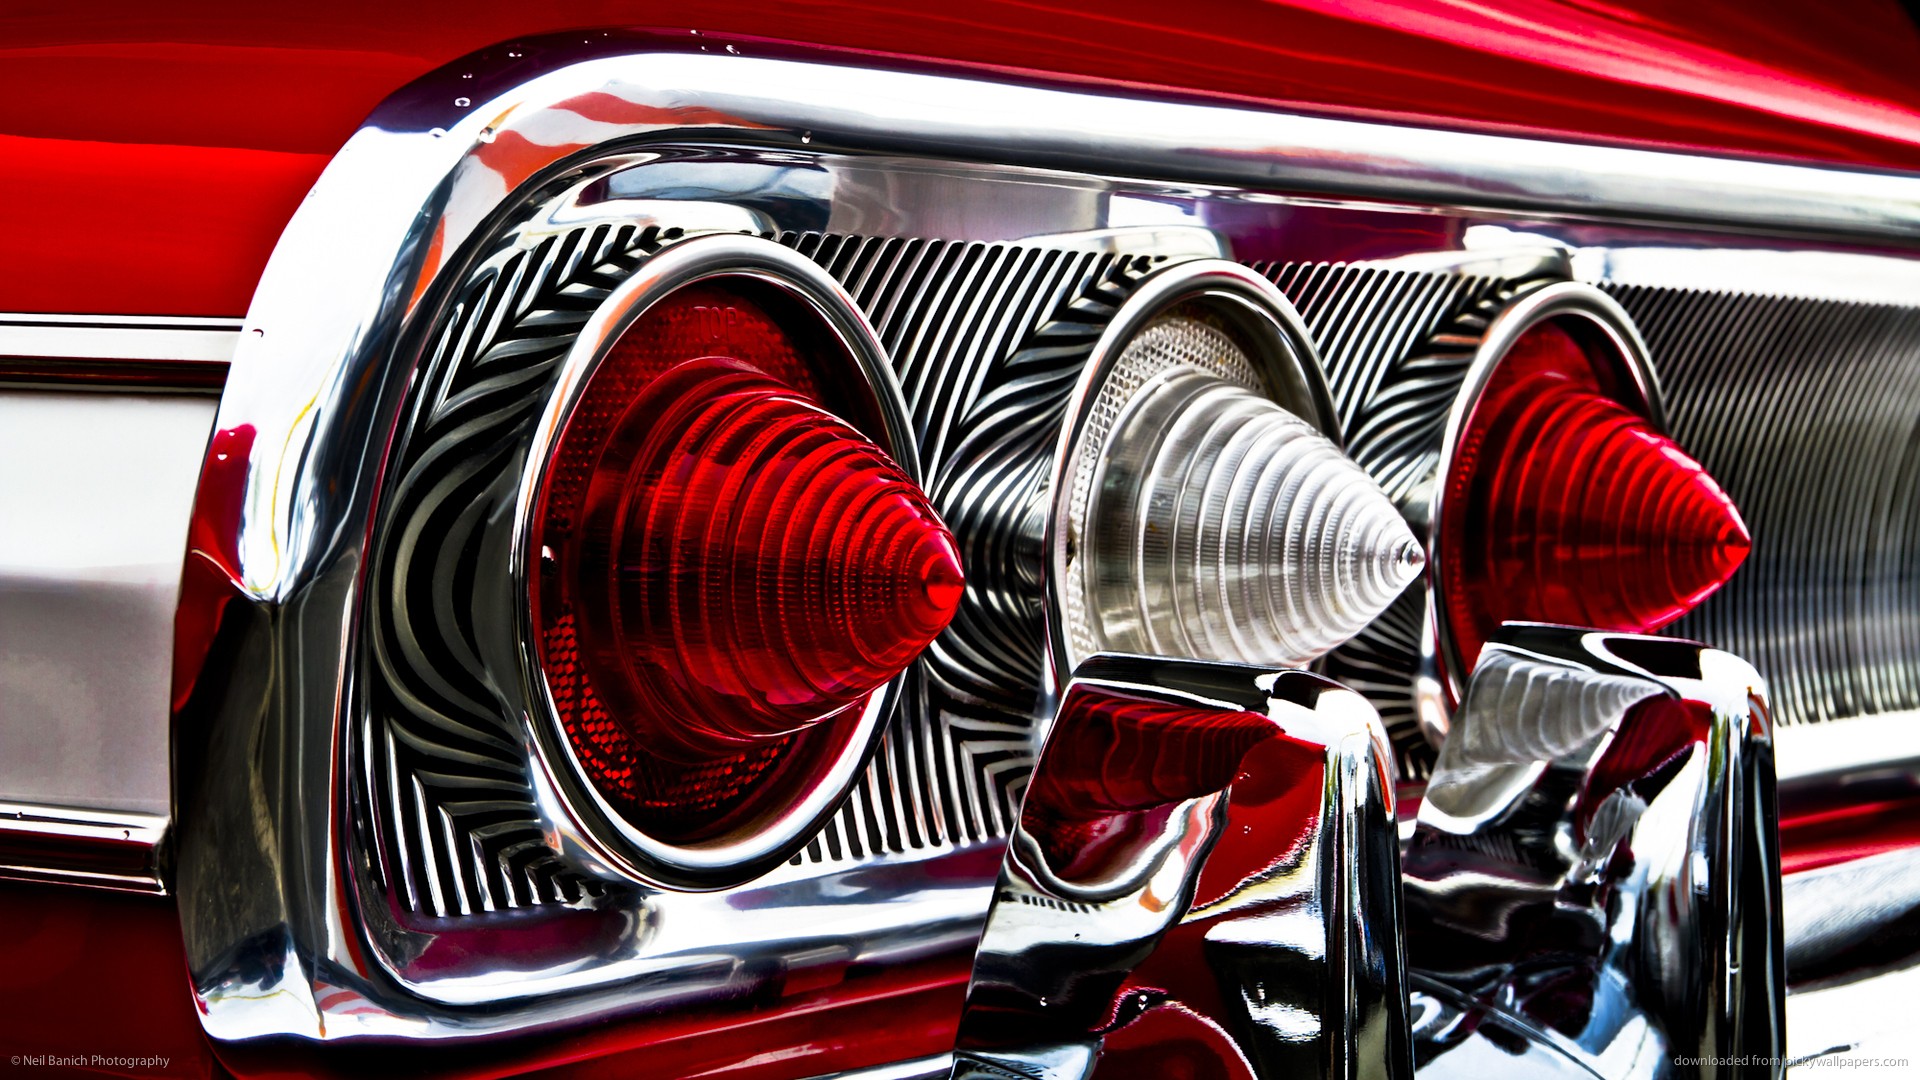 classic, Car, Classic, Hot, Rod, Tail, Light, Red, Chevrolet, Chevy, Impala, Reflection, Chrome Wallpaper